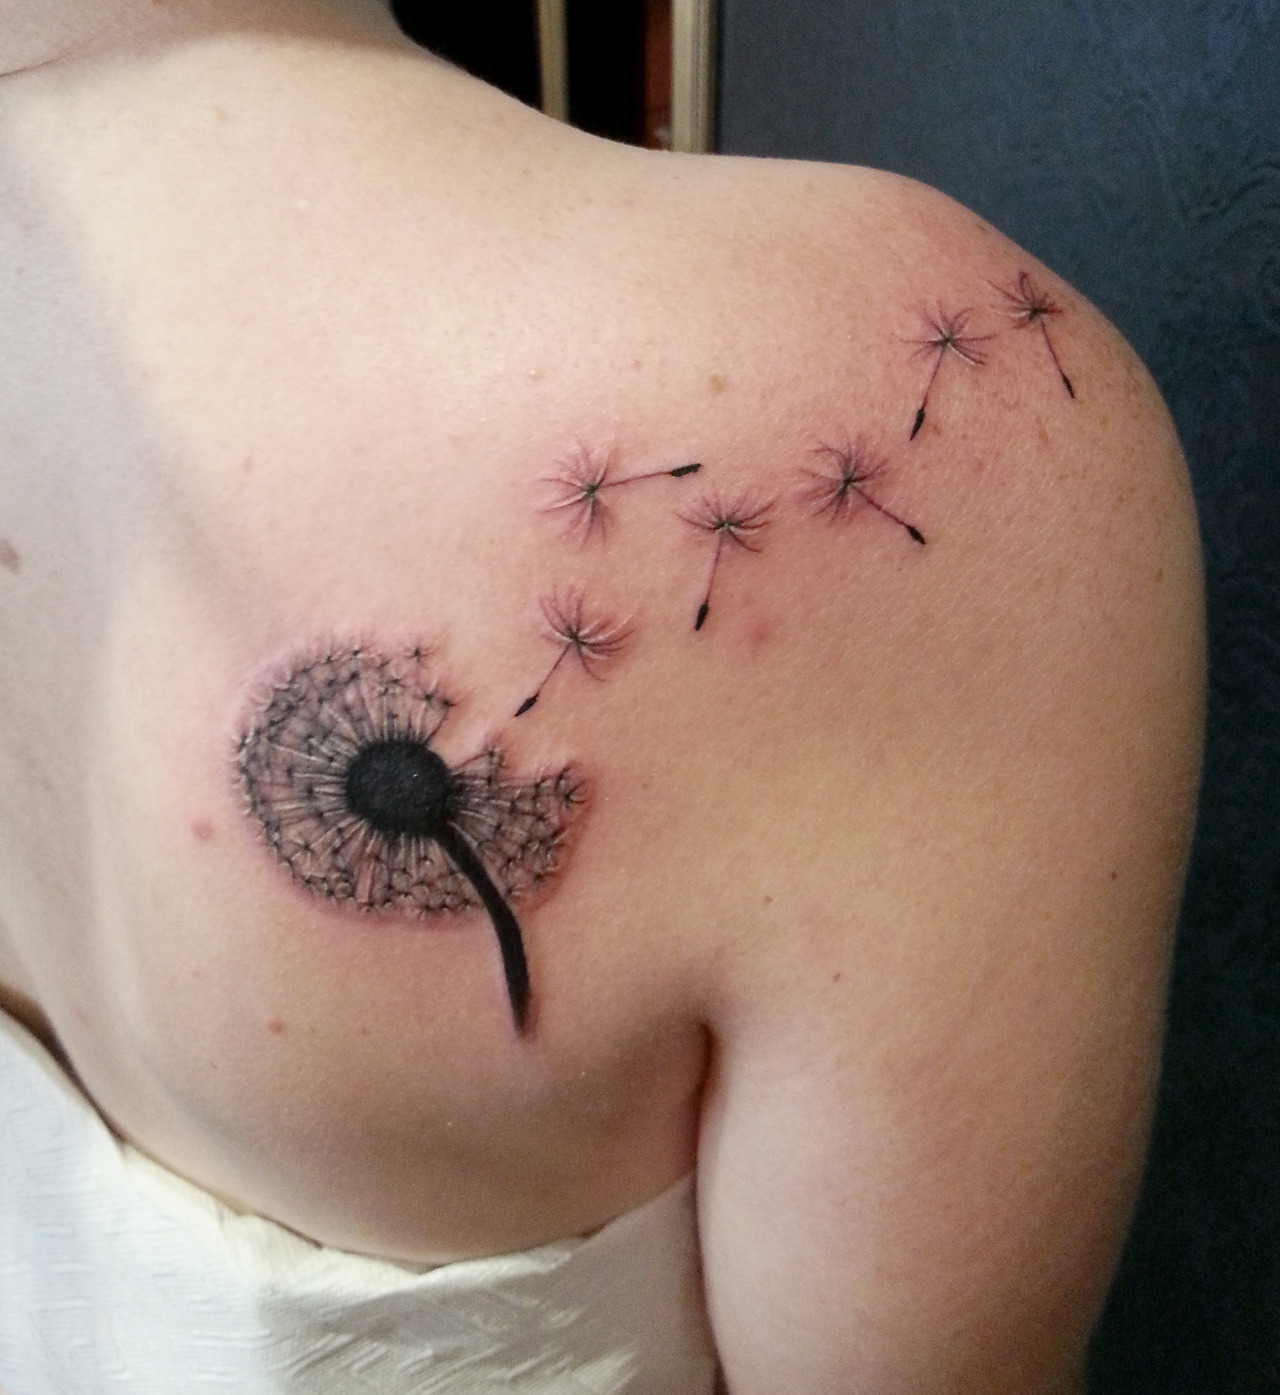 Dandelion temporary tattoo located on the tricep.